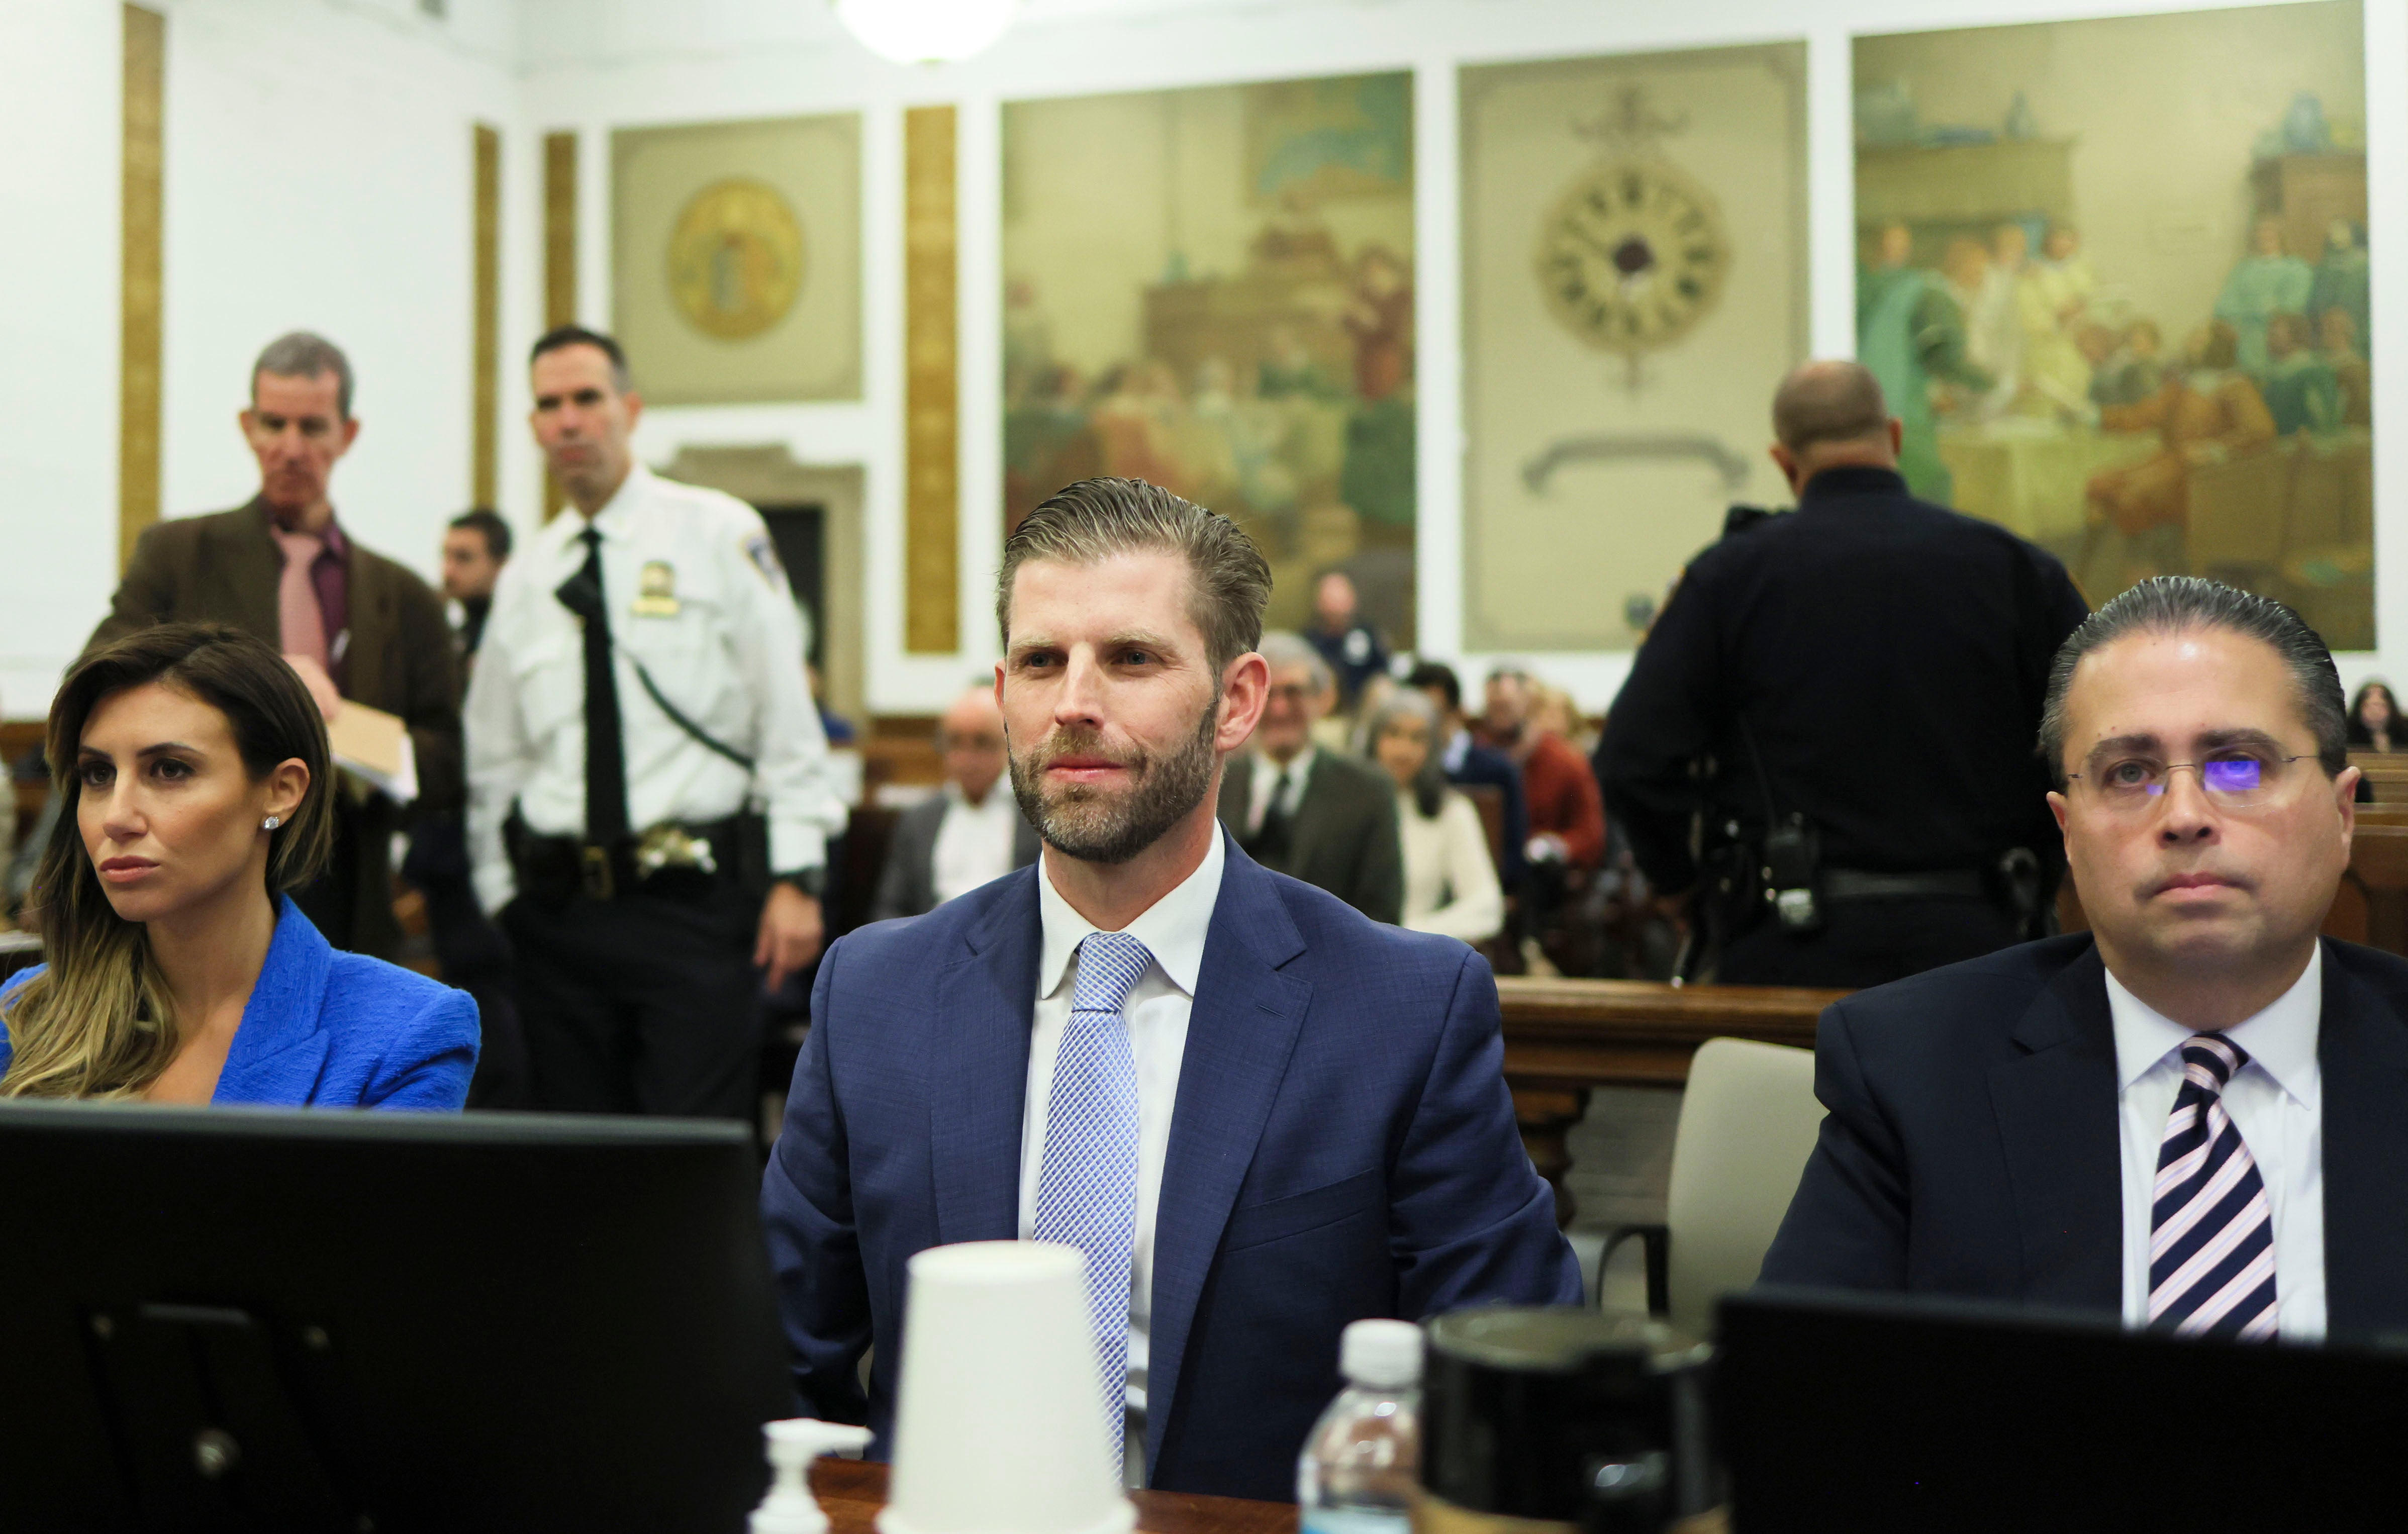 Eric Trump is pictured between his attorneys at the defence table moments before his testimony in a civil trial for fraud in New York Supreme Court